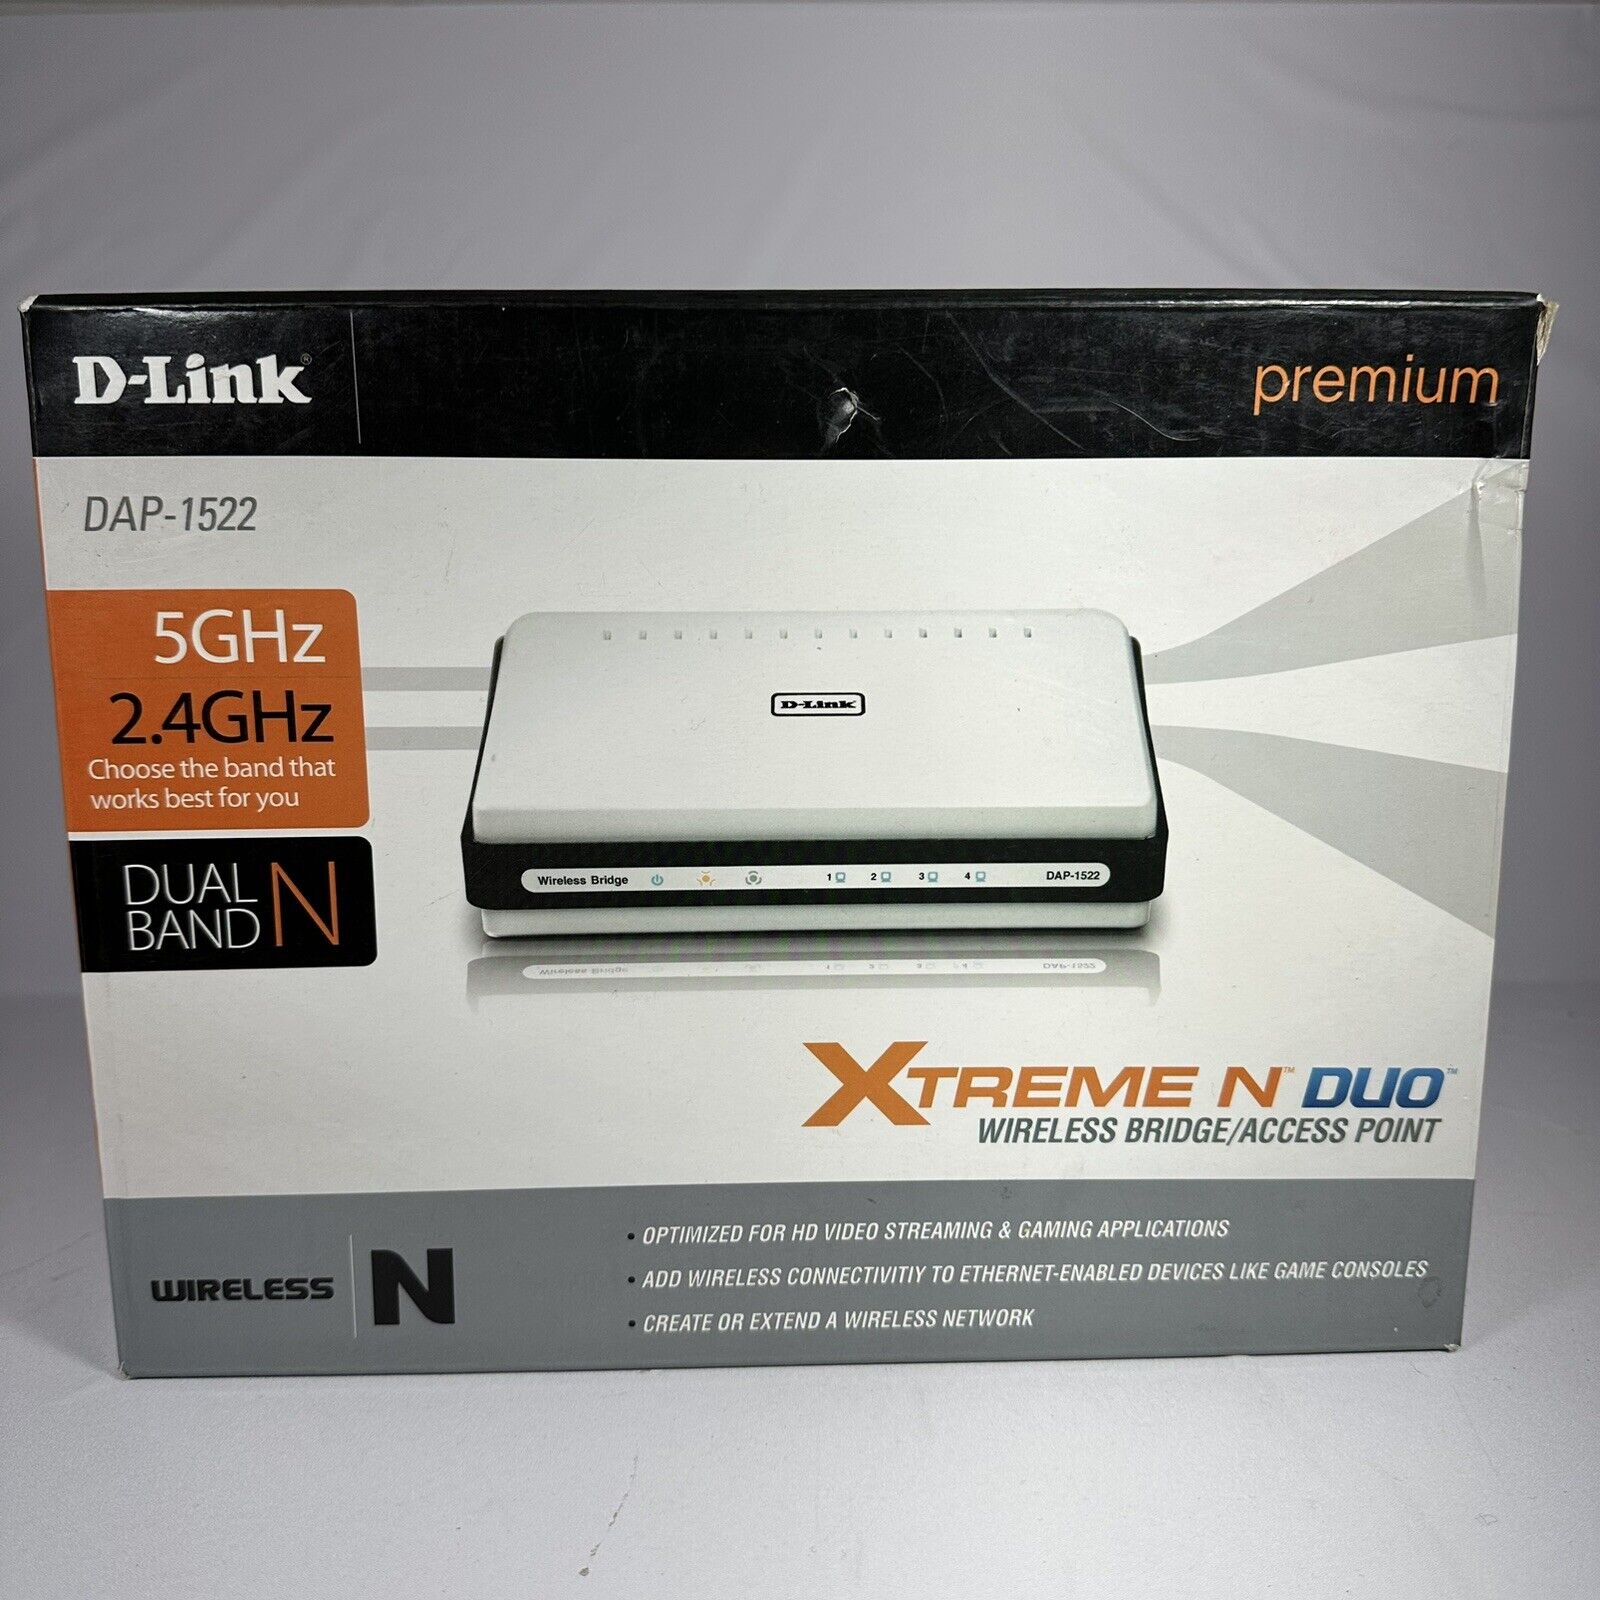 D-Link Xtreme N Duo Wireless N Access Point Bridge DAP-1522 with Power Supply